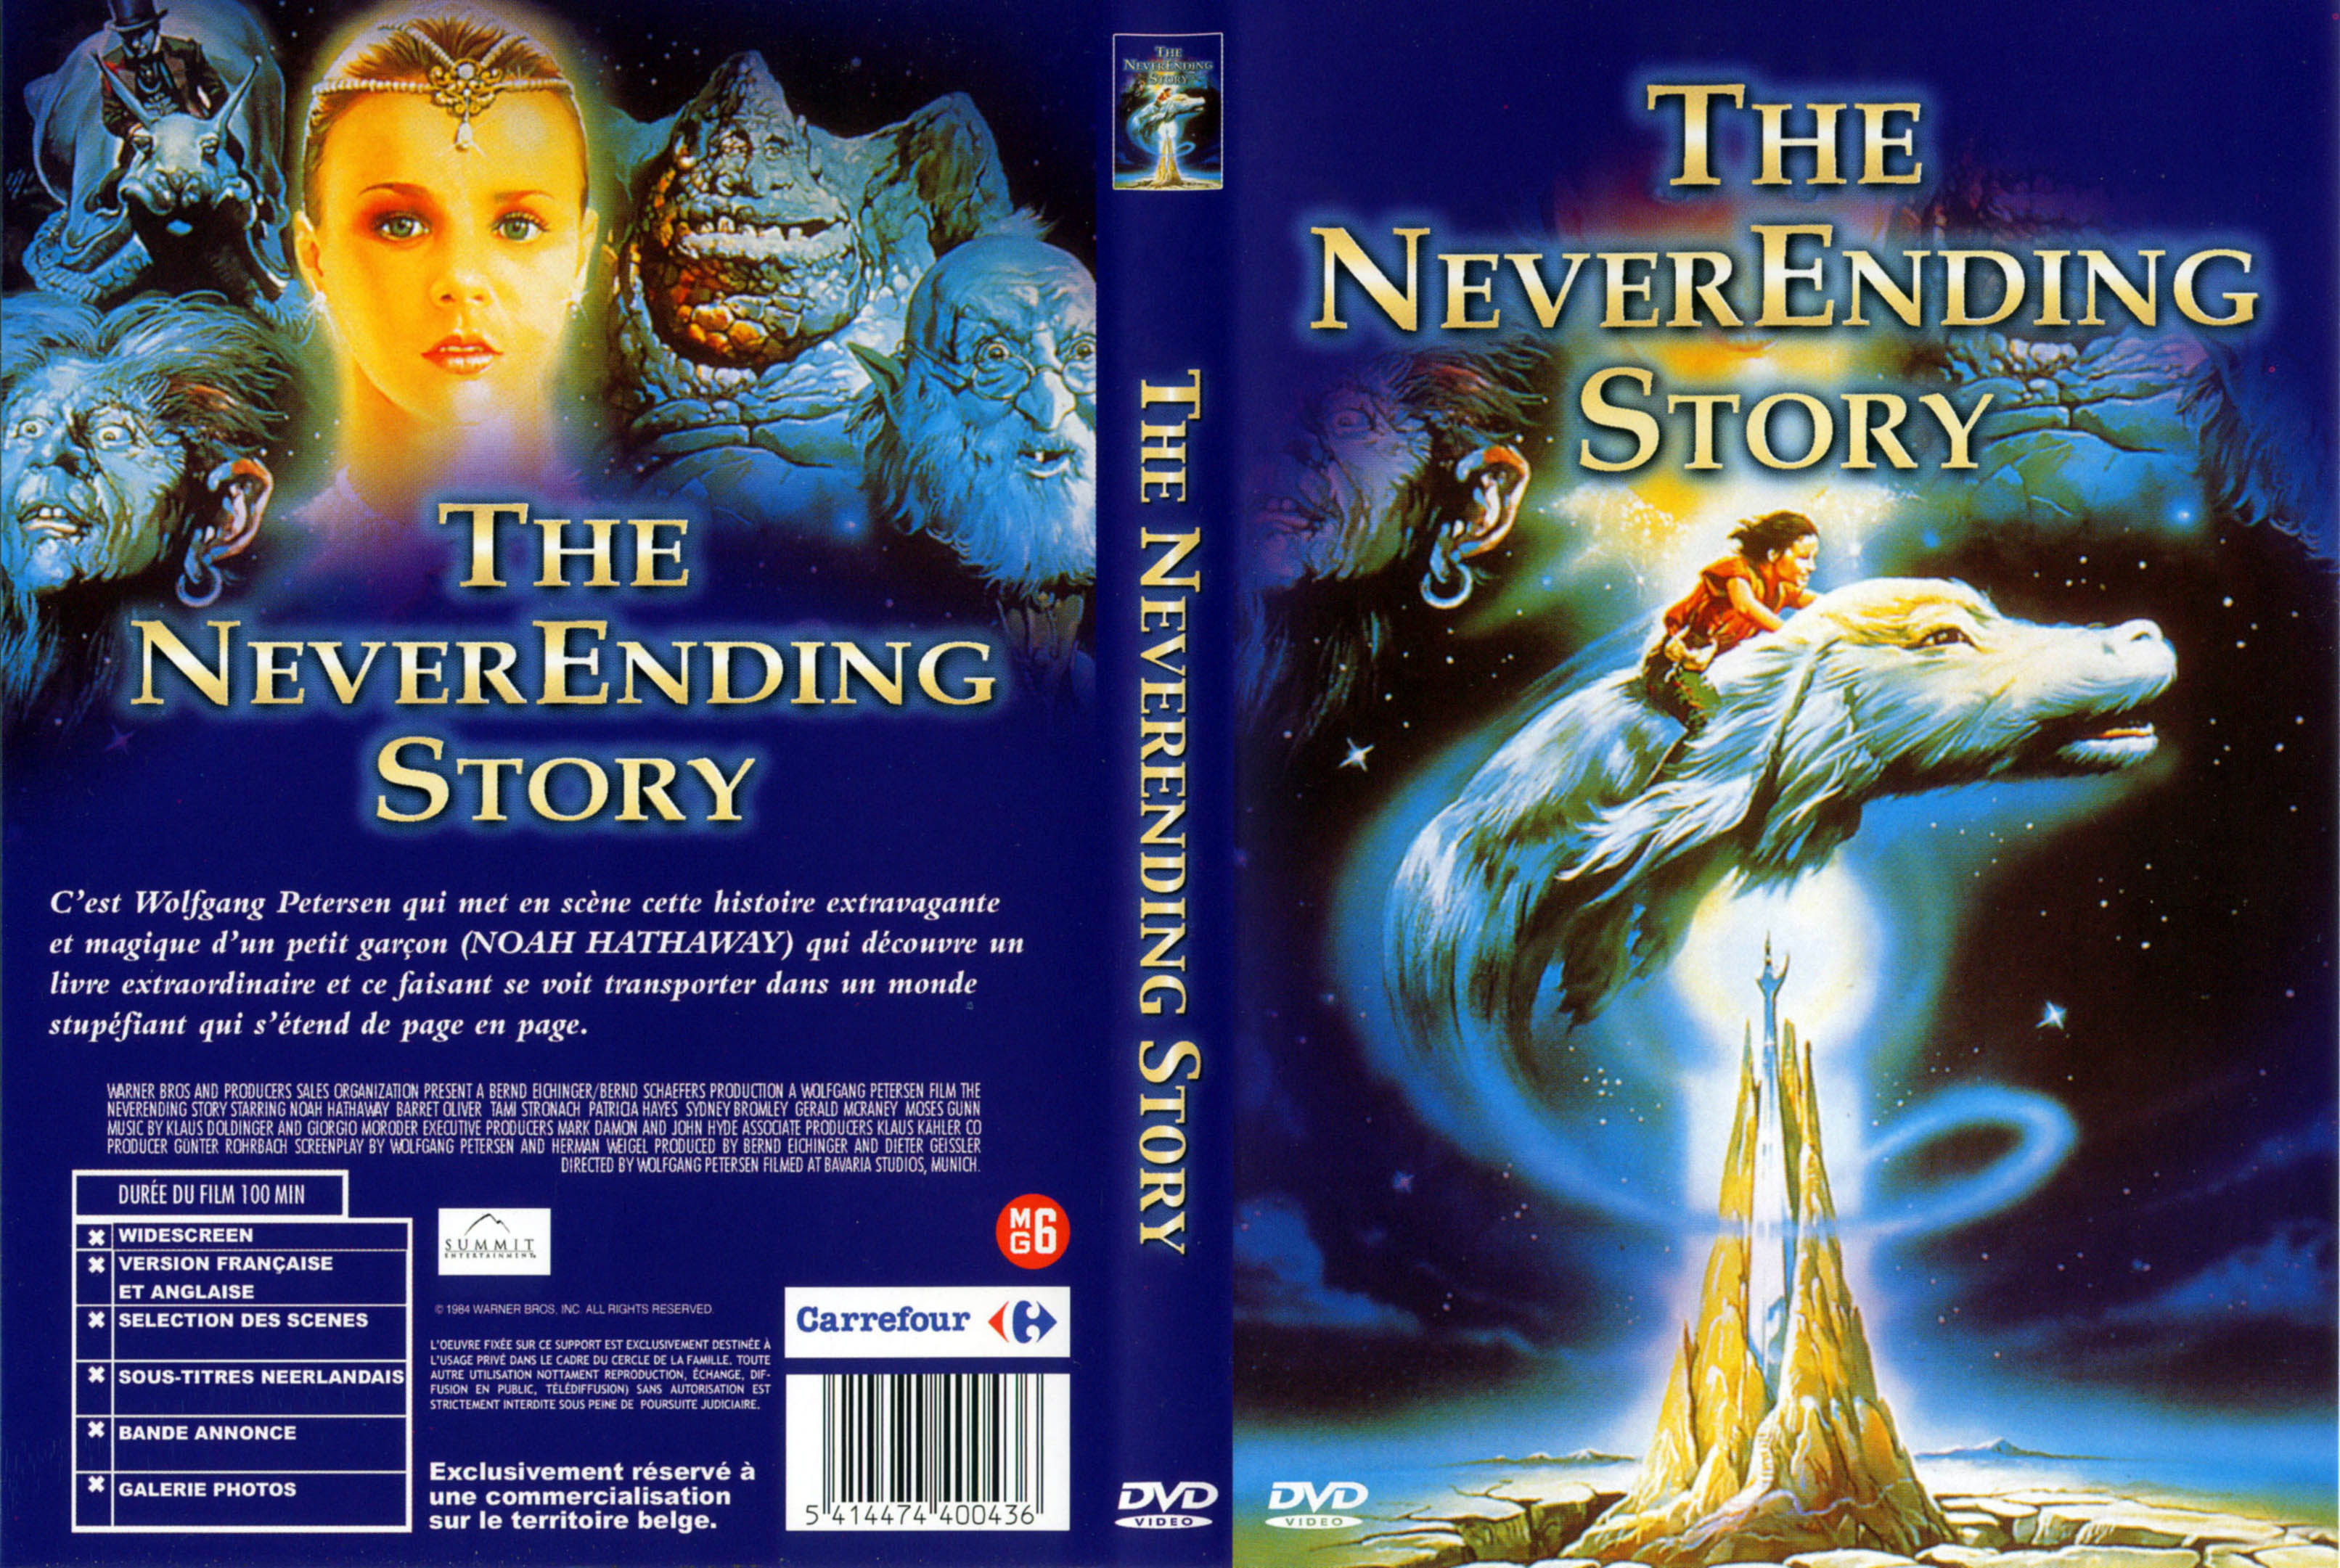 Jaquette DVD The neverending story